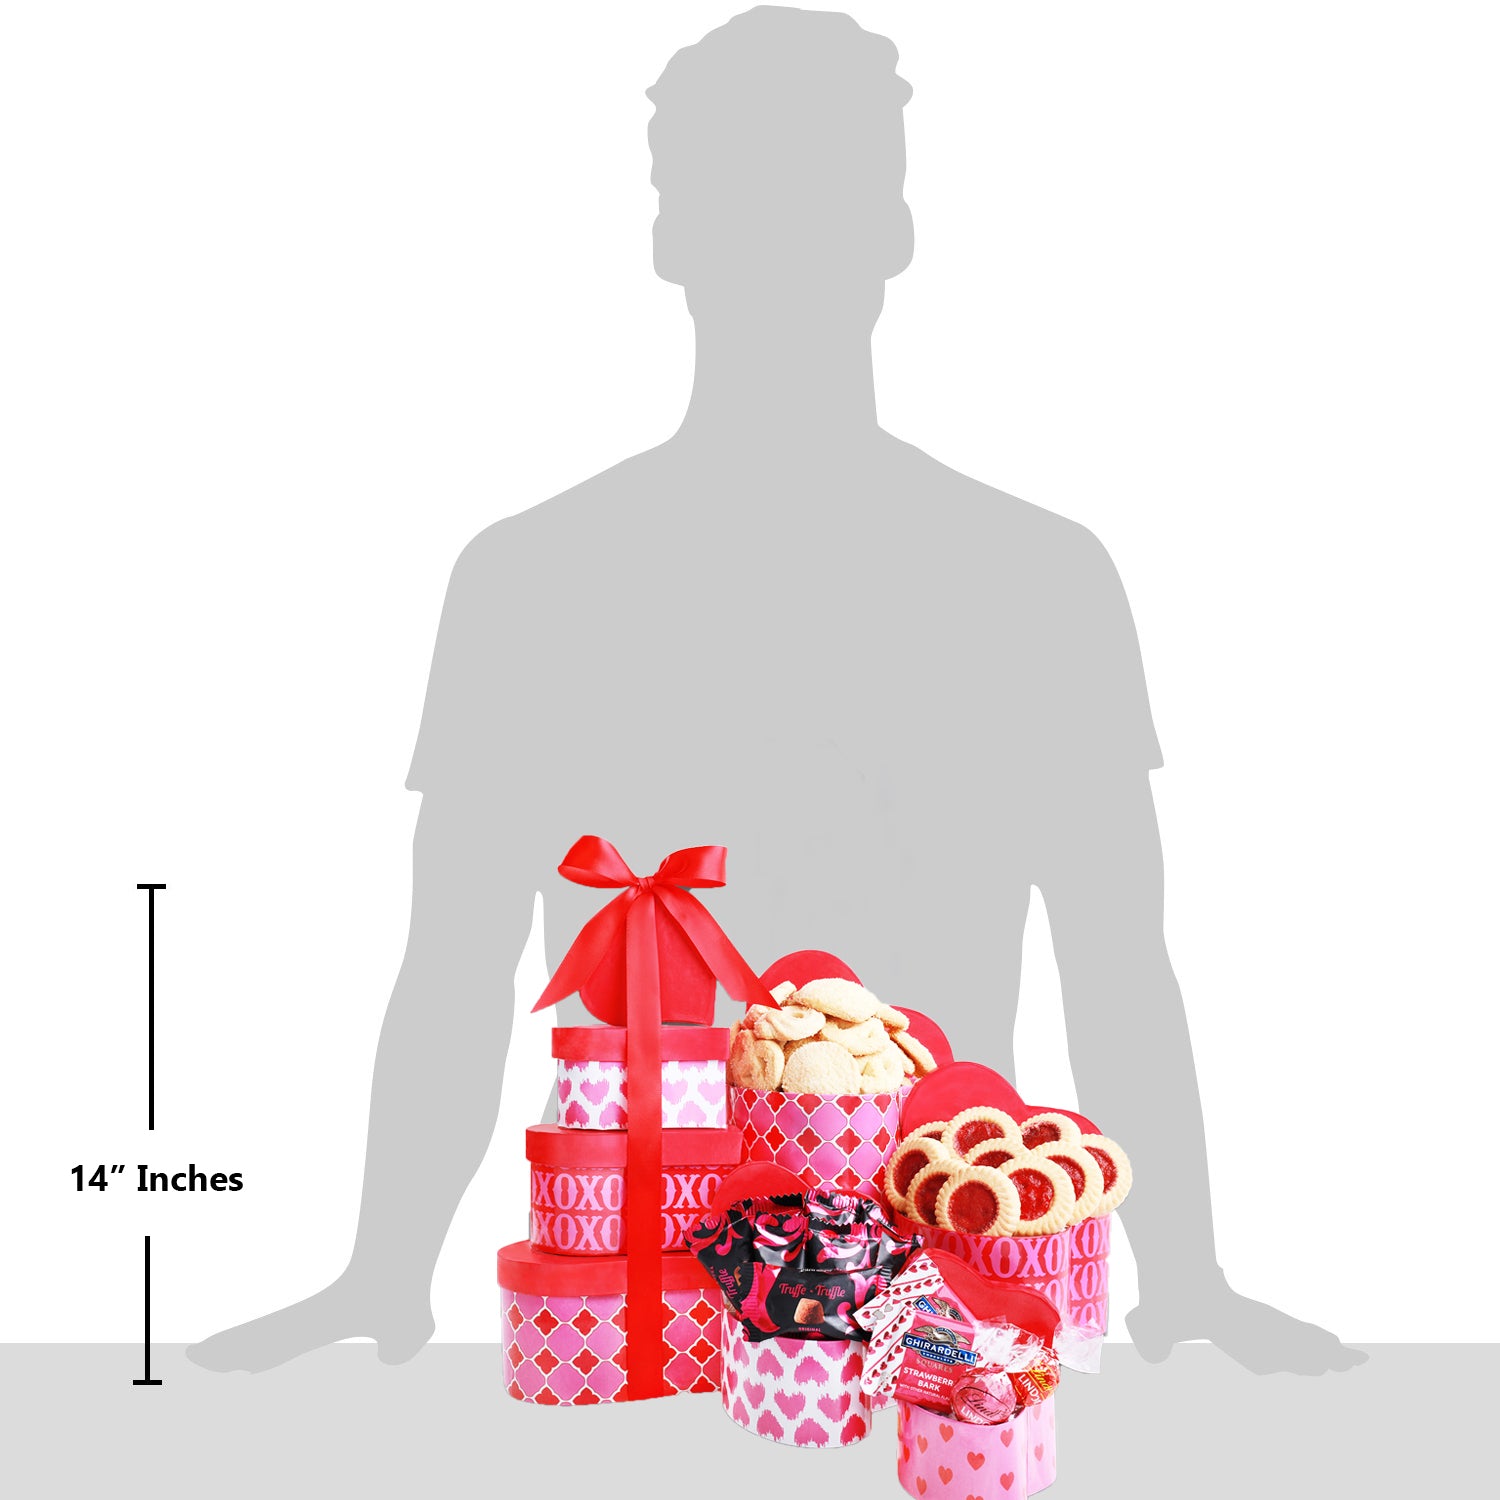 Gift Tower over man illustration to demonstrate height.